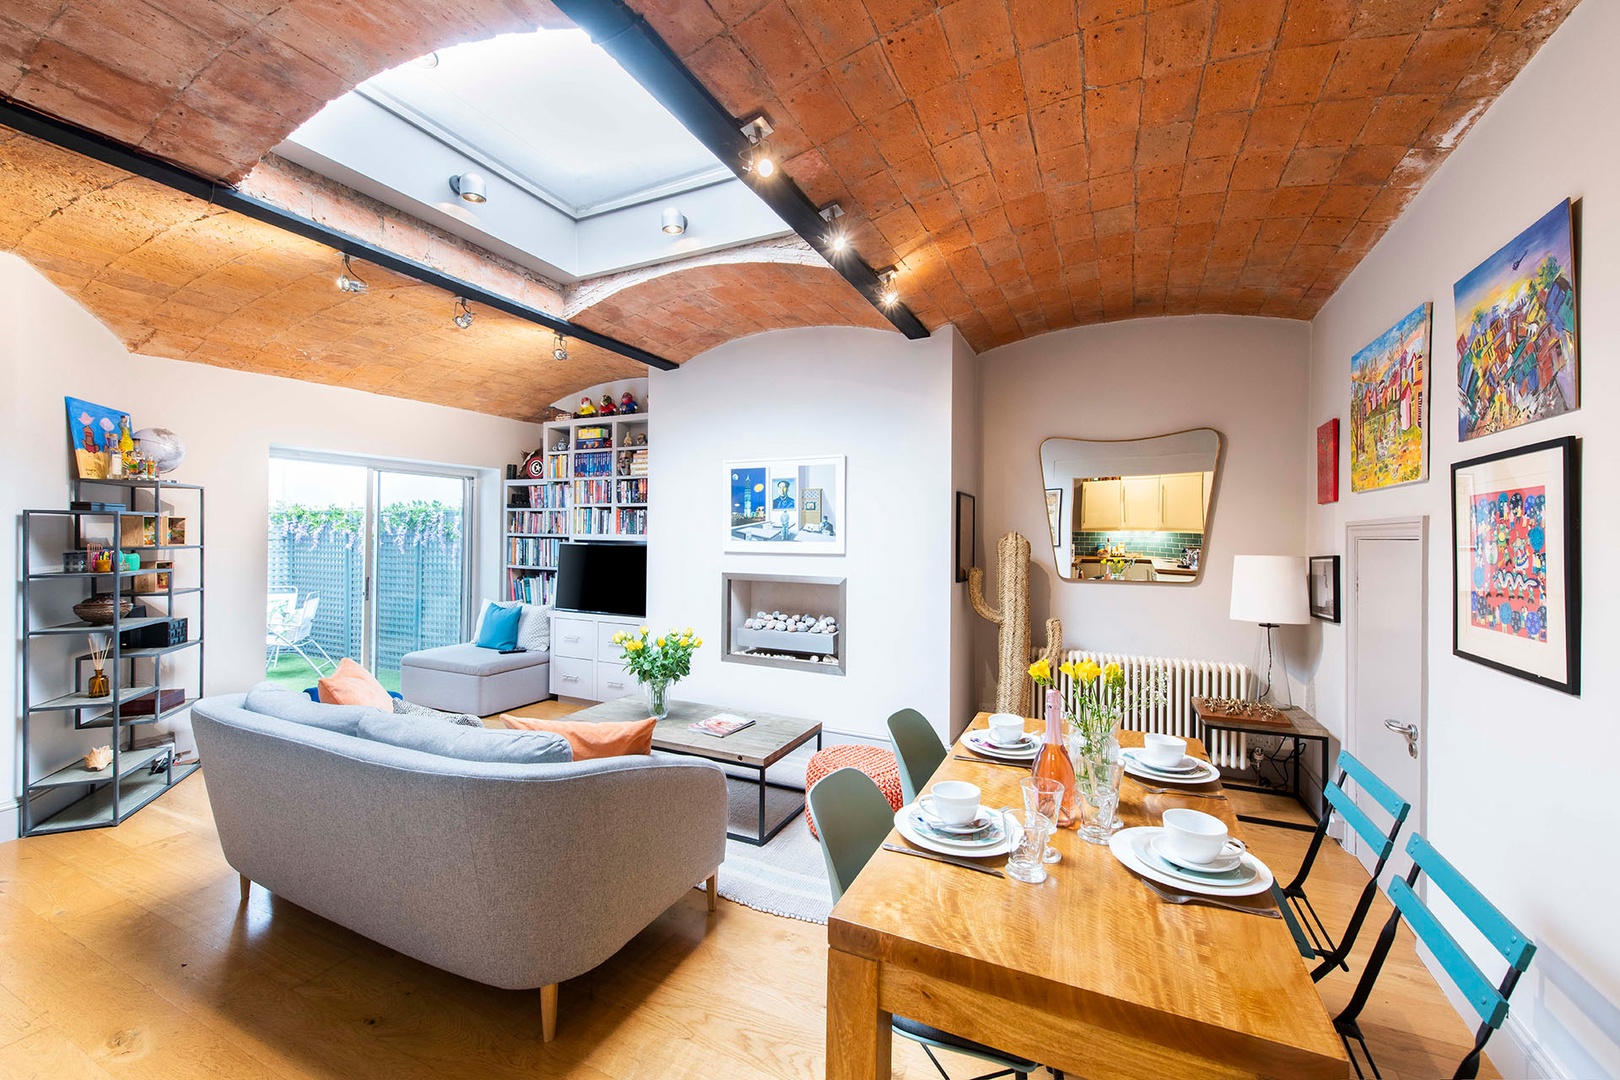 Unique vaulted ceiling adds warmth and character.